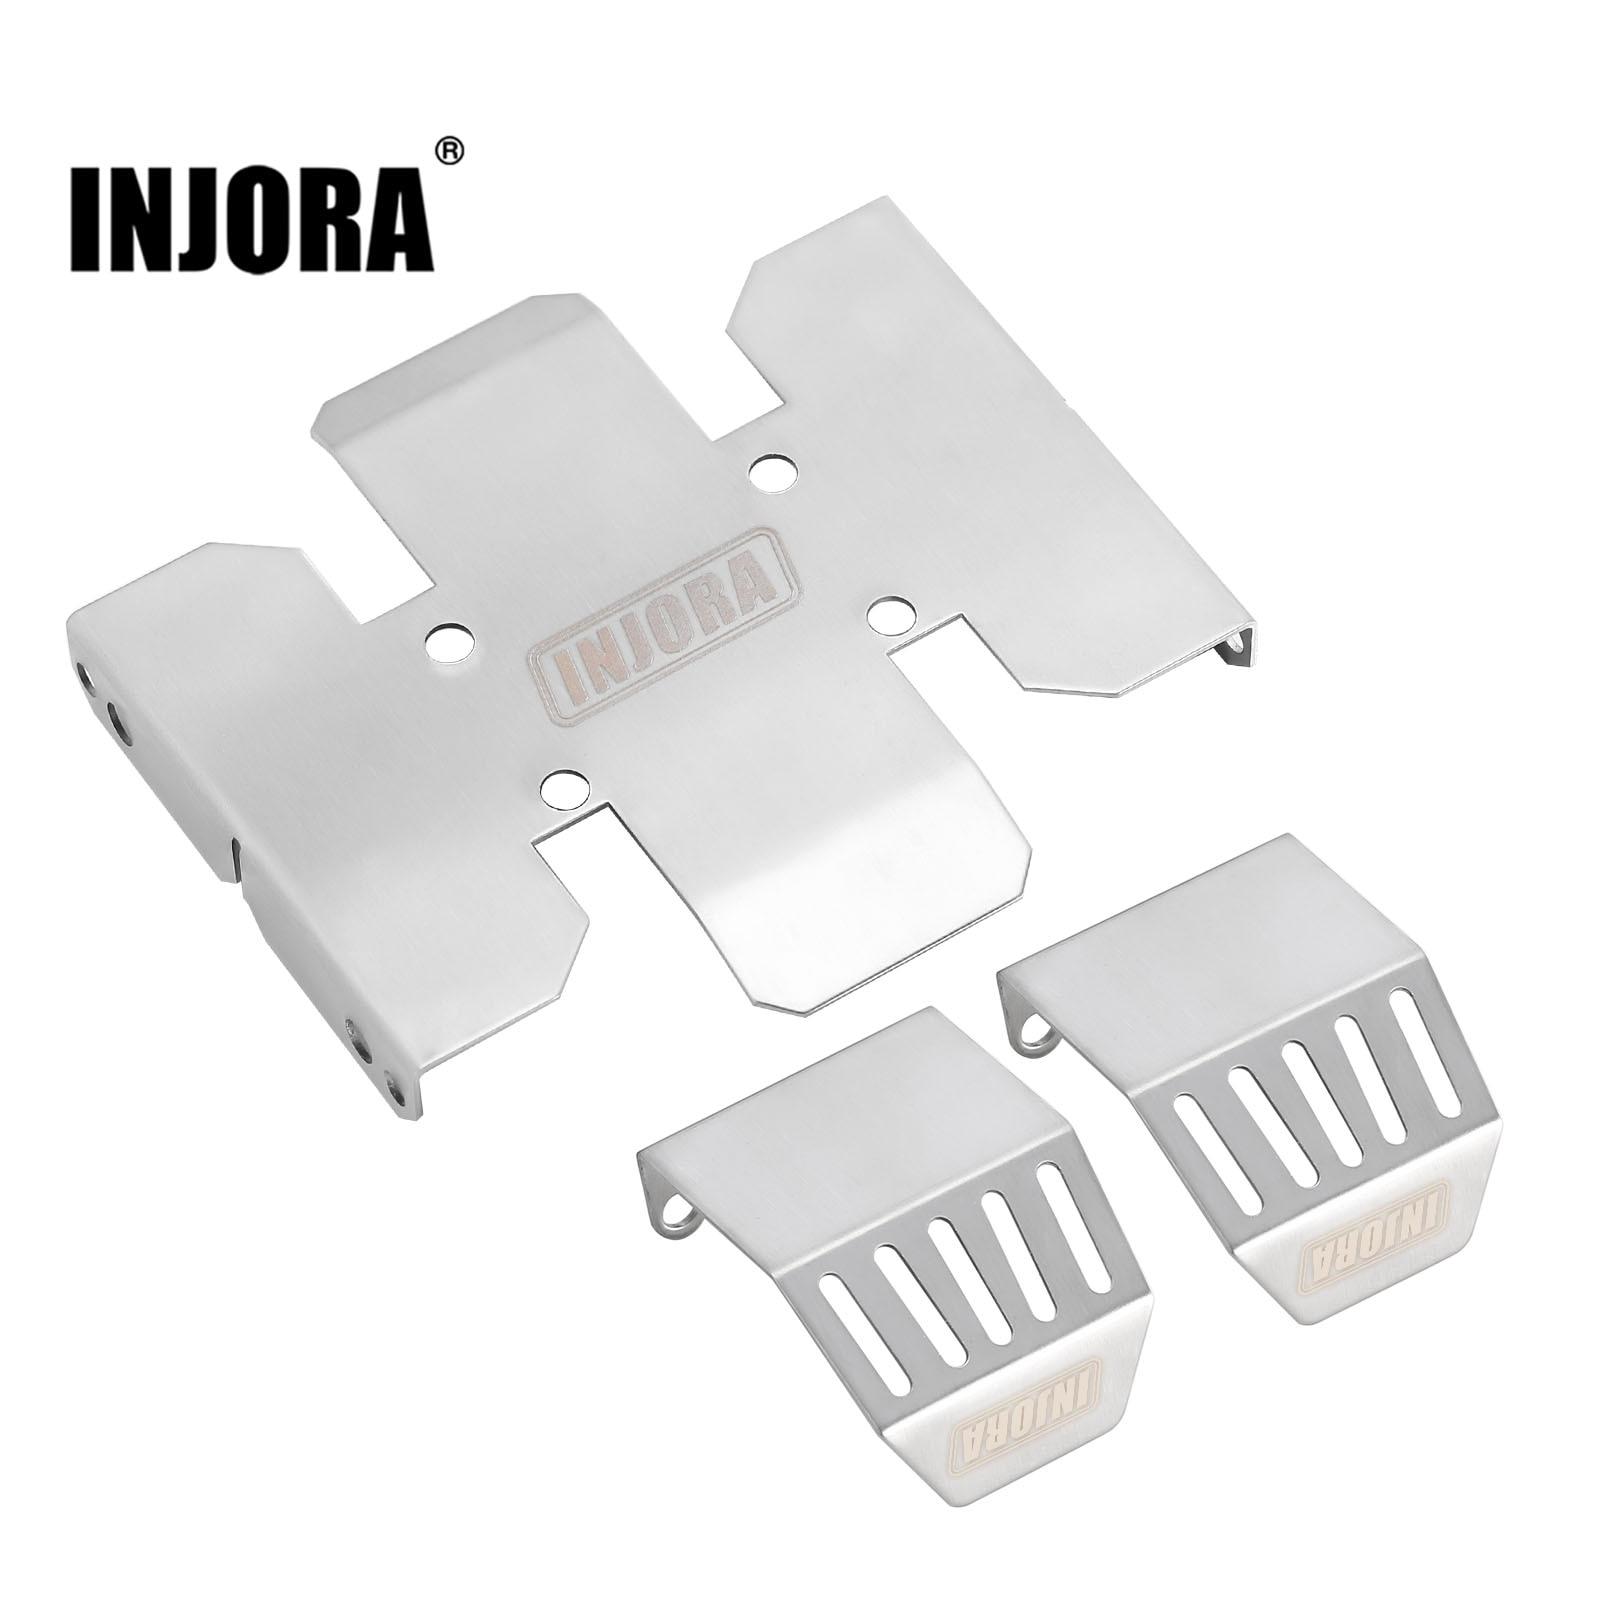 INJORA-Stainless-Steel-Chassis-Armor-Skid-Plate-Axle-Protector-for-1-10-RC-Crawler-Axial-SCX10.jpg